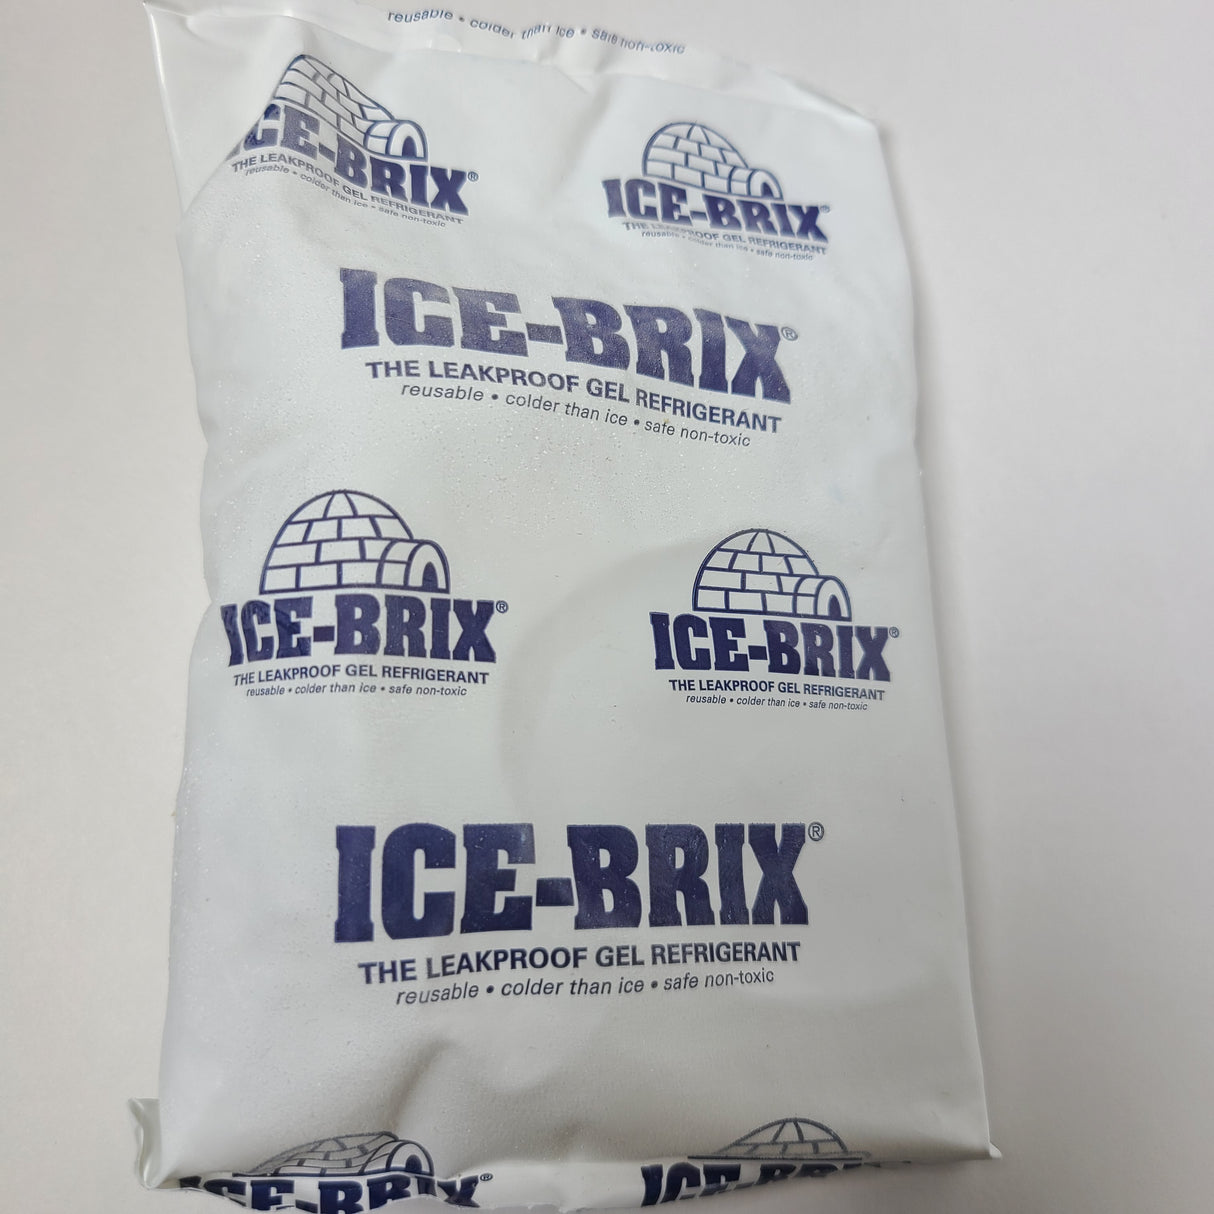 One 6 OZ  Ice-Brix shipping pack